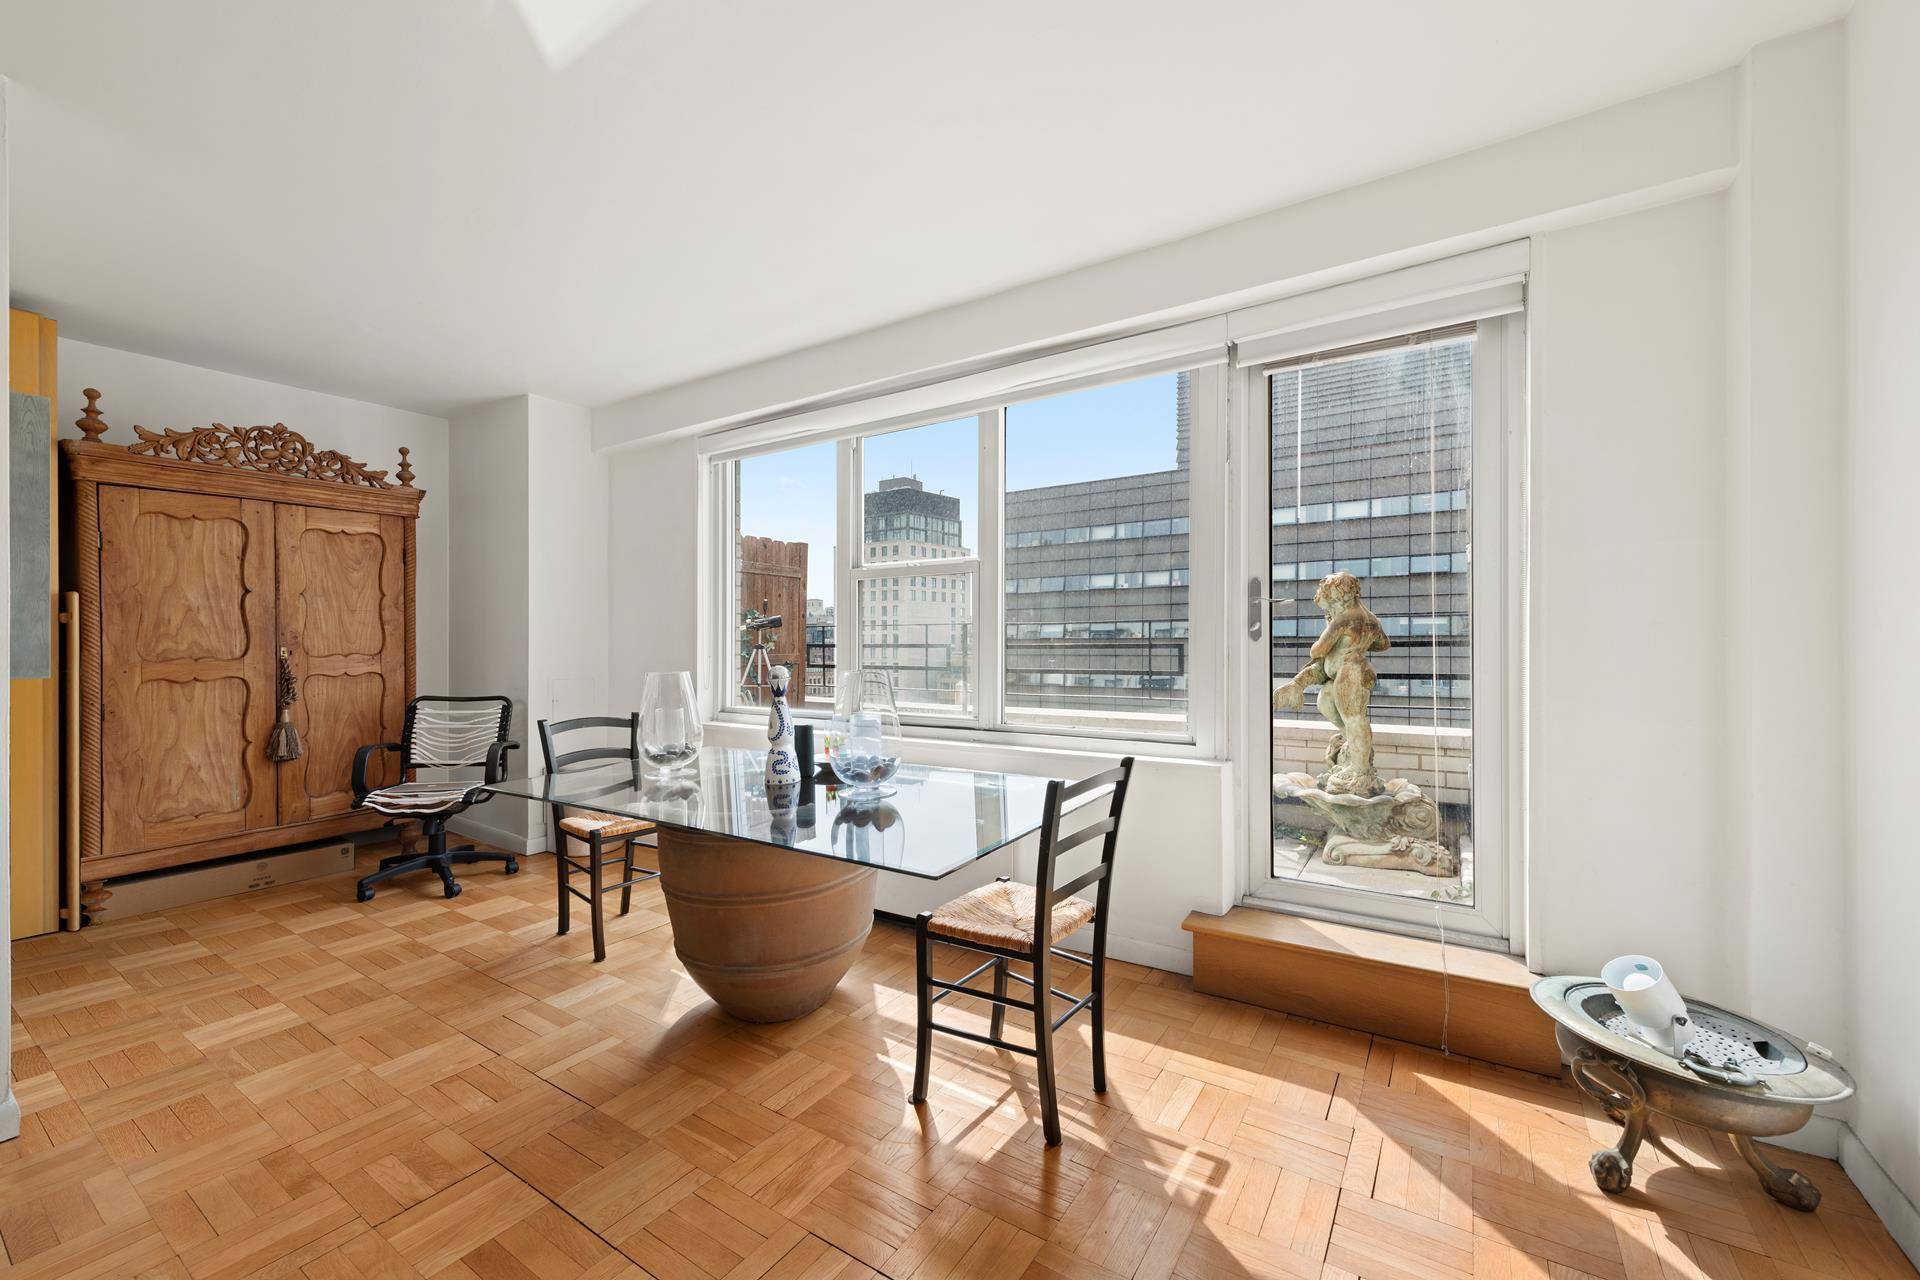 Introducing the ultimate New York City retreat a pied terre Penthouse Studio Gem on Fifth Avenue !